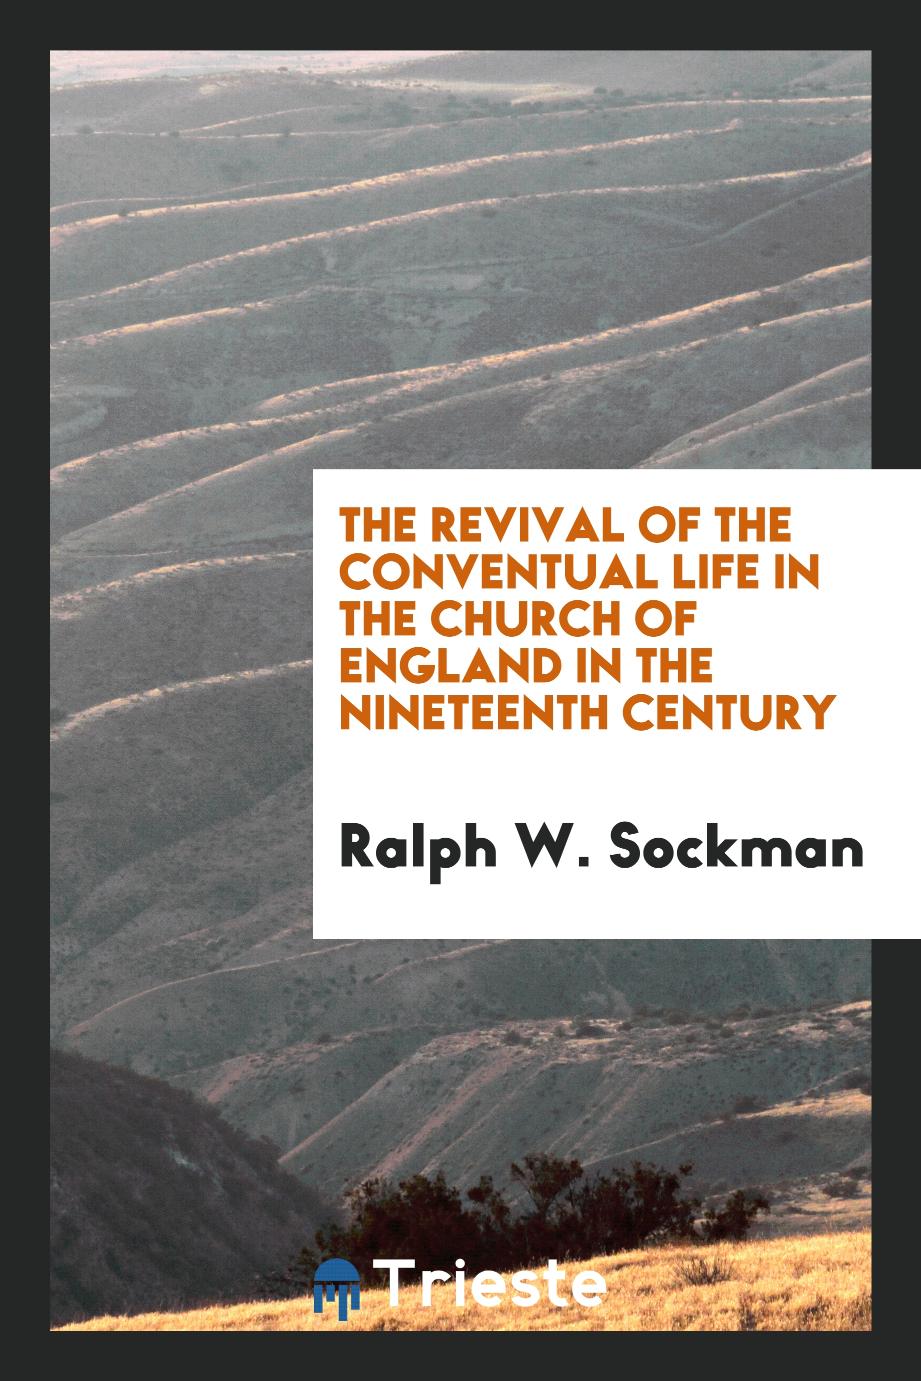 The revival of the conventual life in the Church of England in the nineteenth century